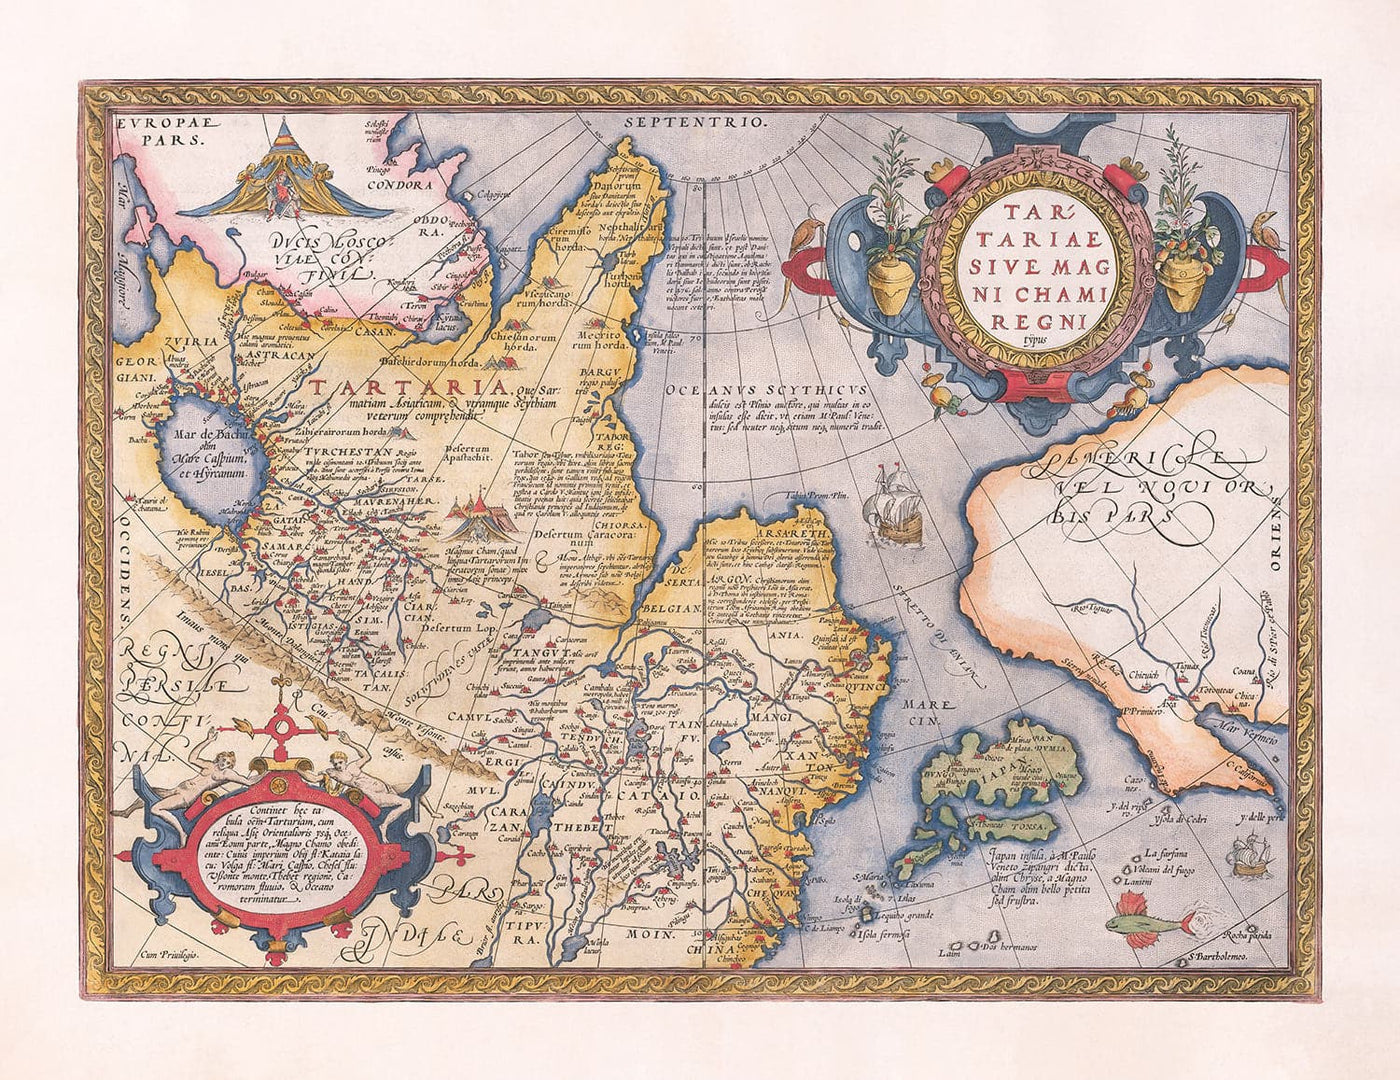 Old Map of Tartary (Russia, Siberia, China) in 1584 by Ortelius - Rare Chart of Central Asia, America, Japan